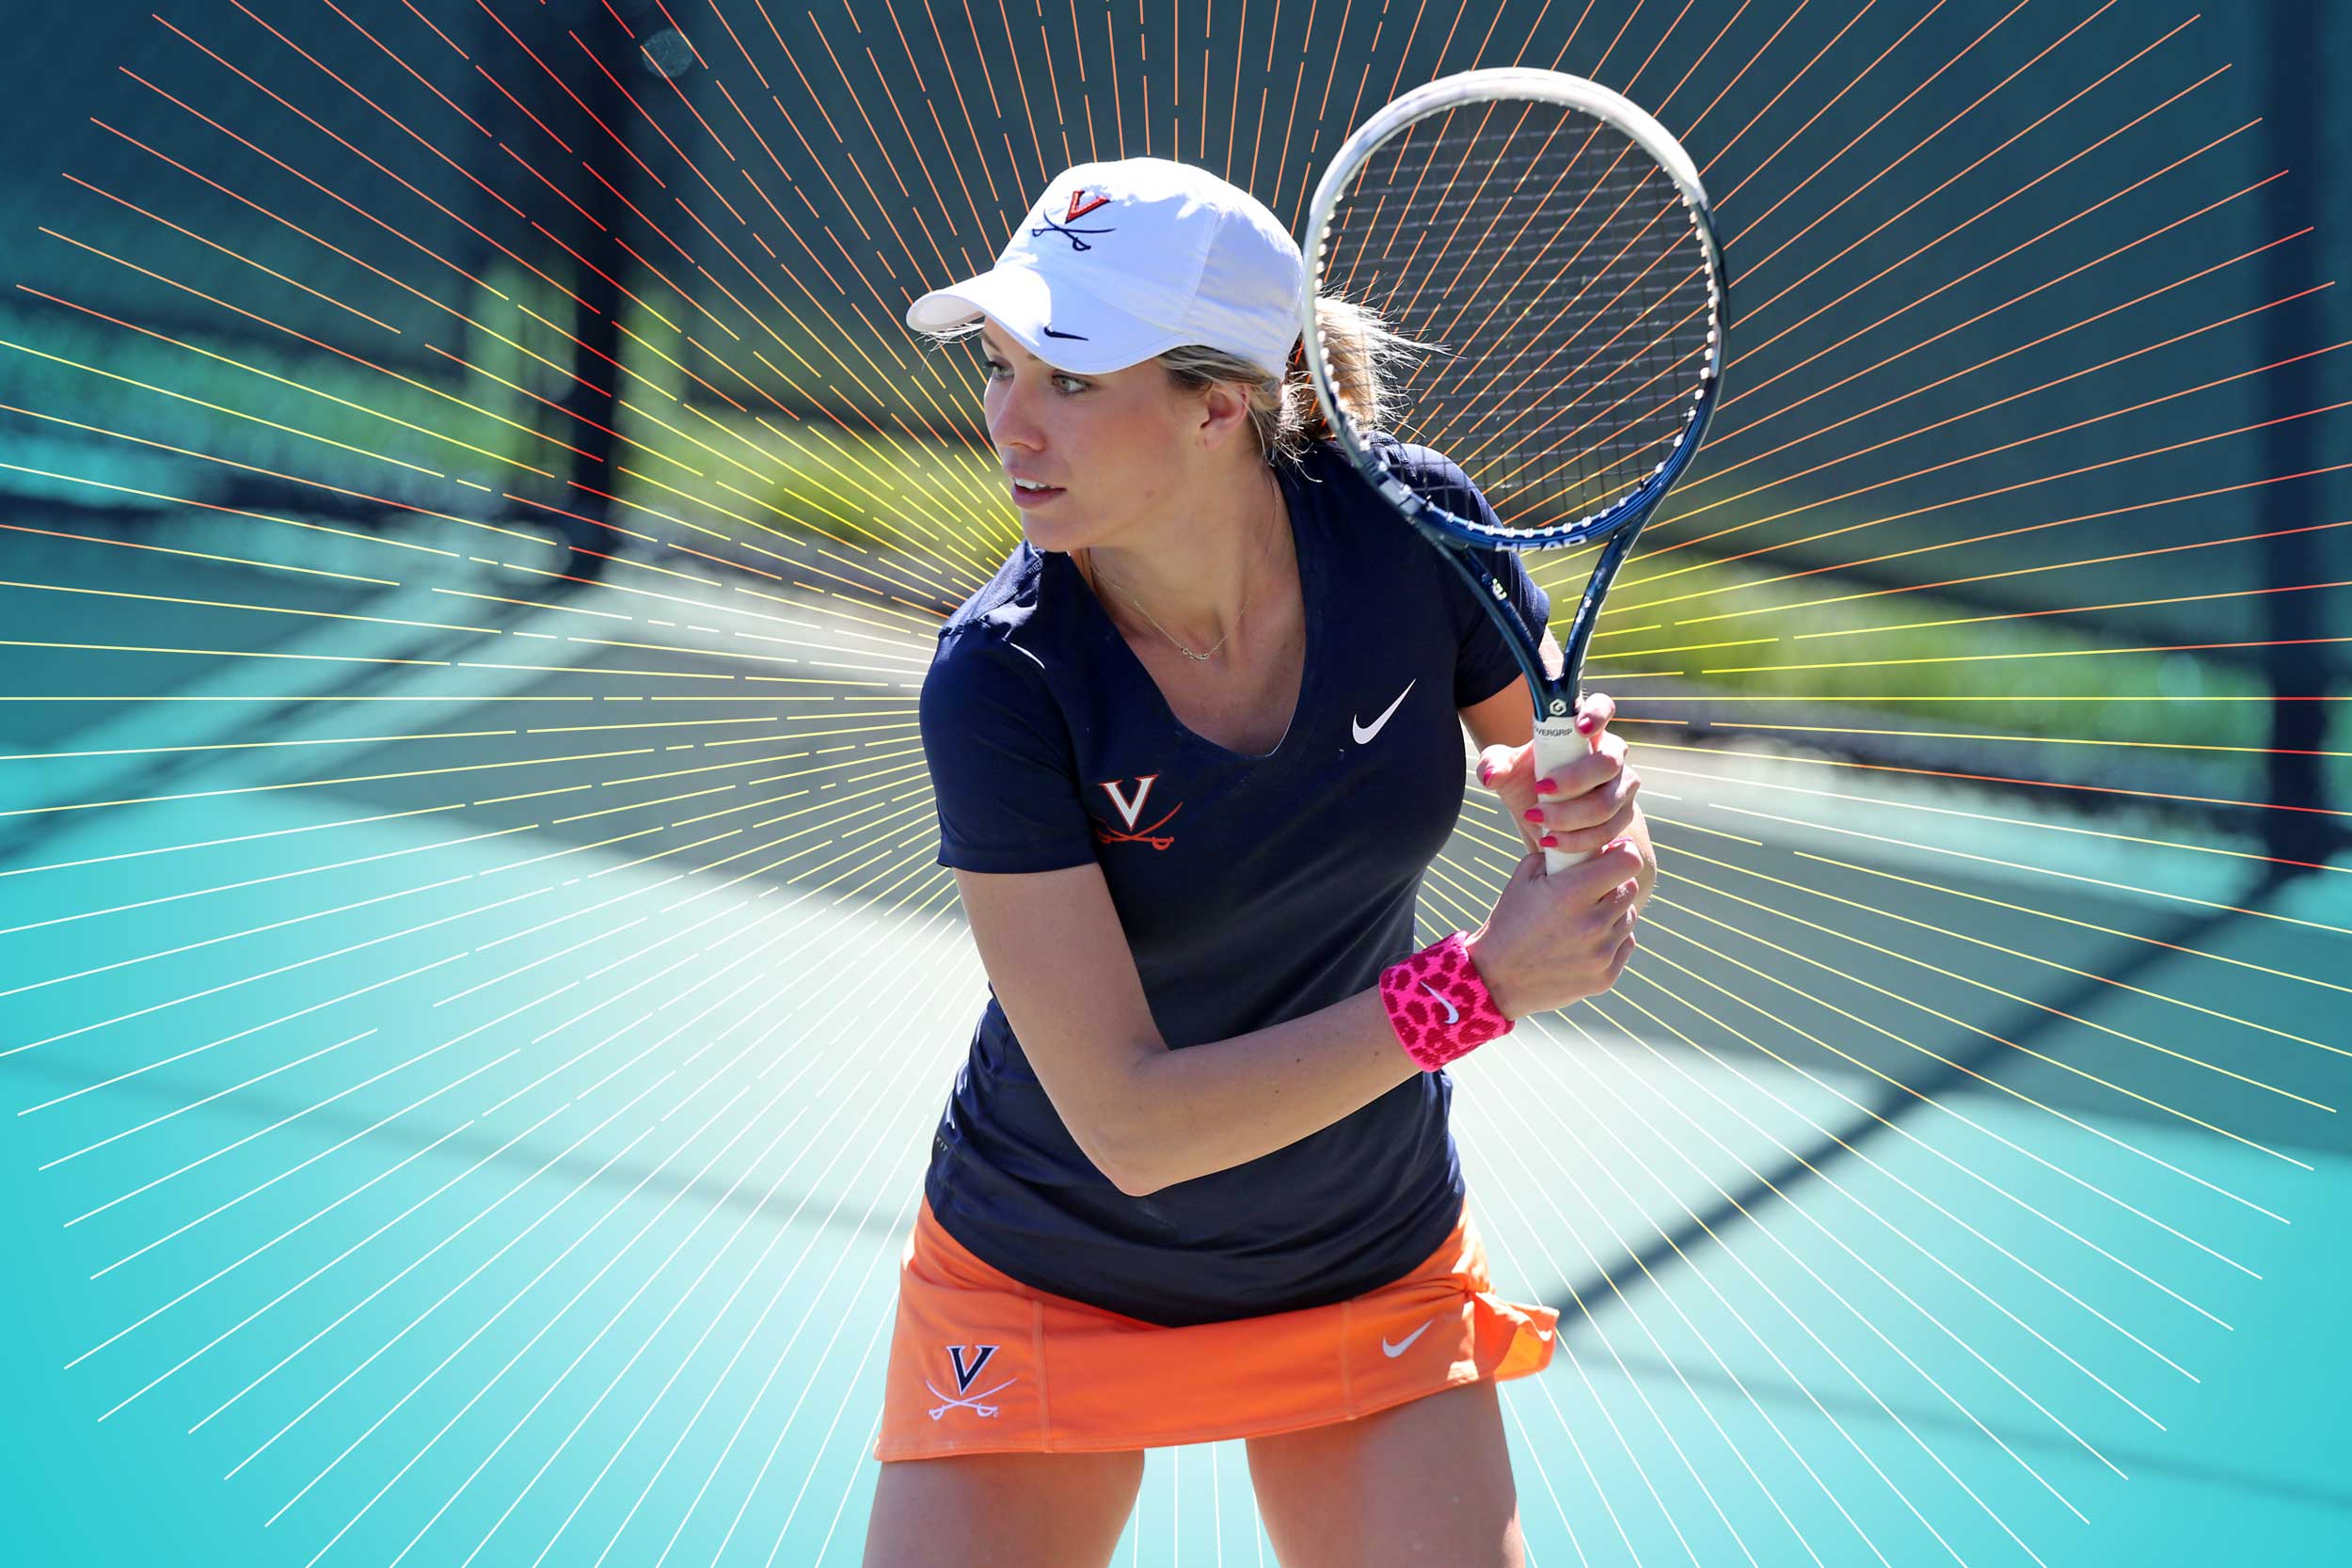 Tennis Alum, Olympian Danielle Collins Determined To Go Out on Top